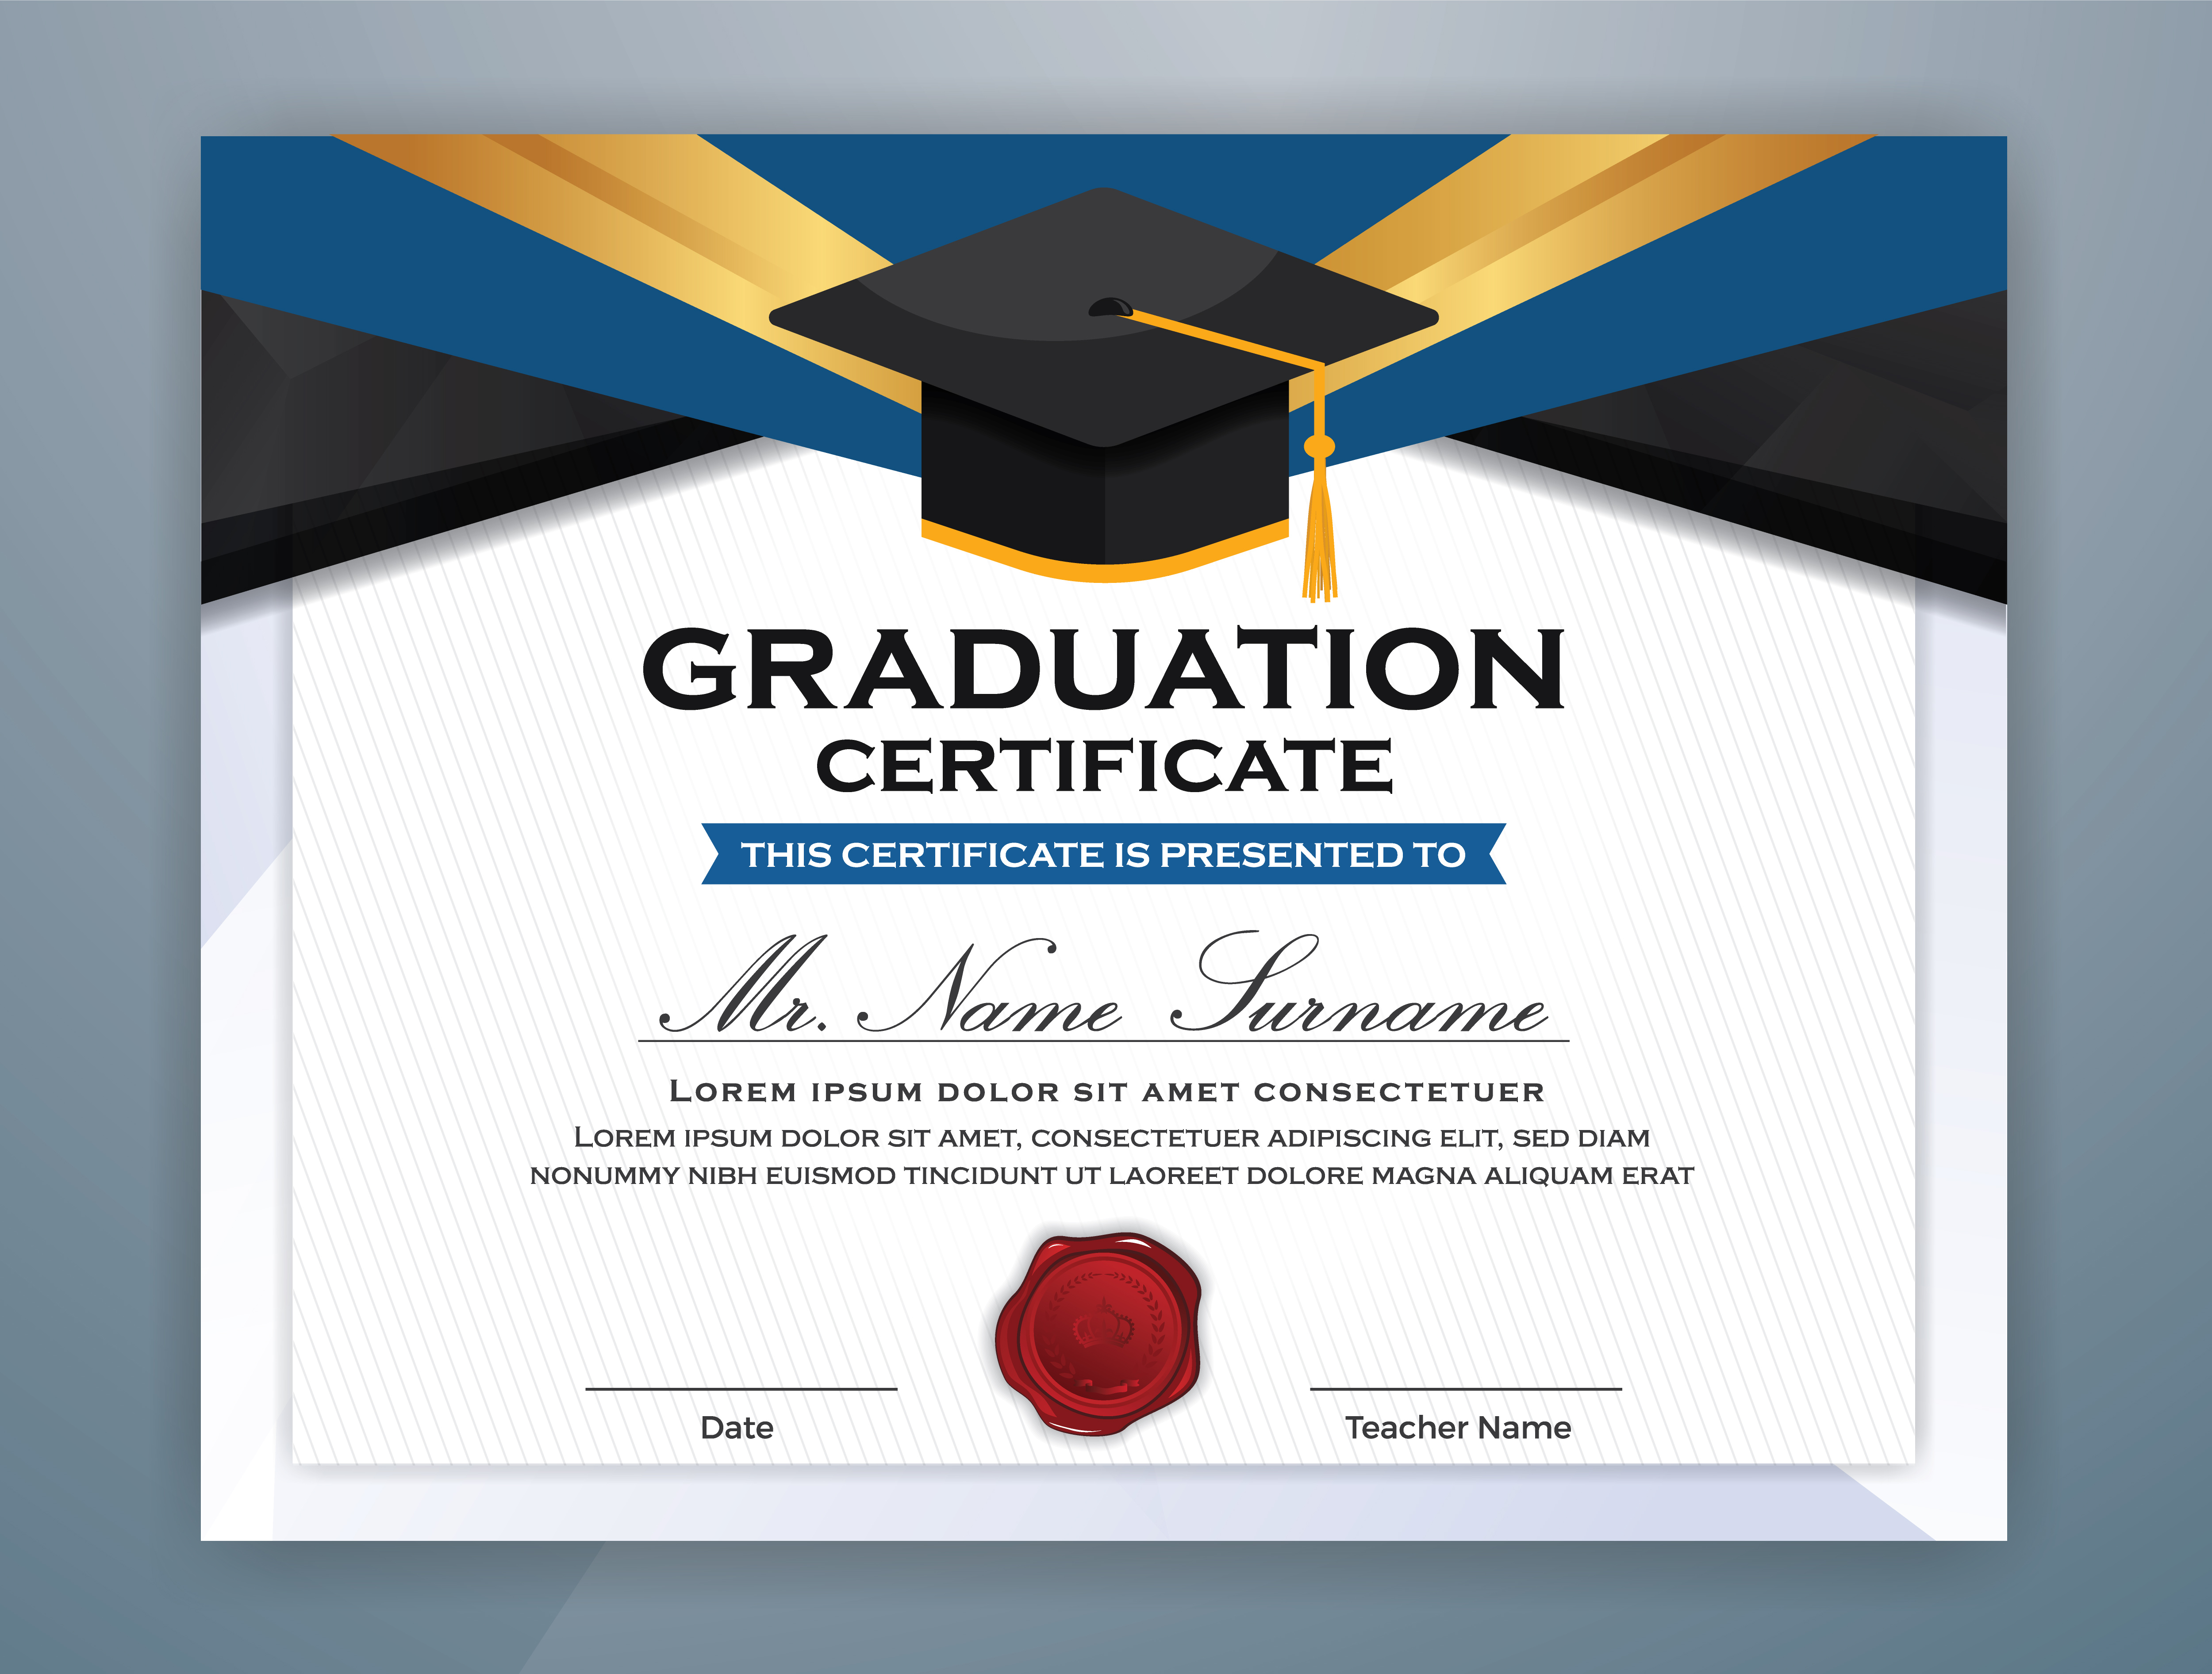 graduation-certificate-vector-art-icons-and-graphics-for-free-download